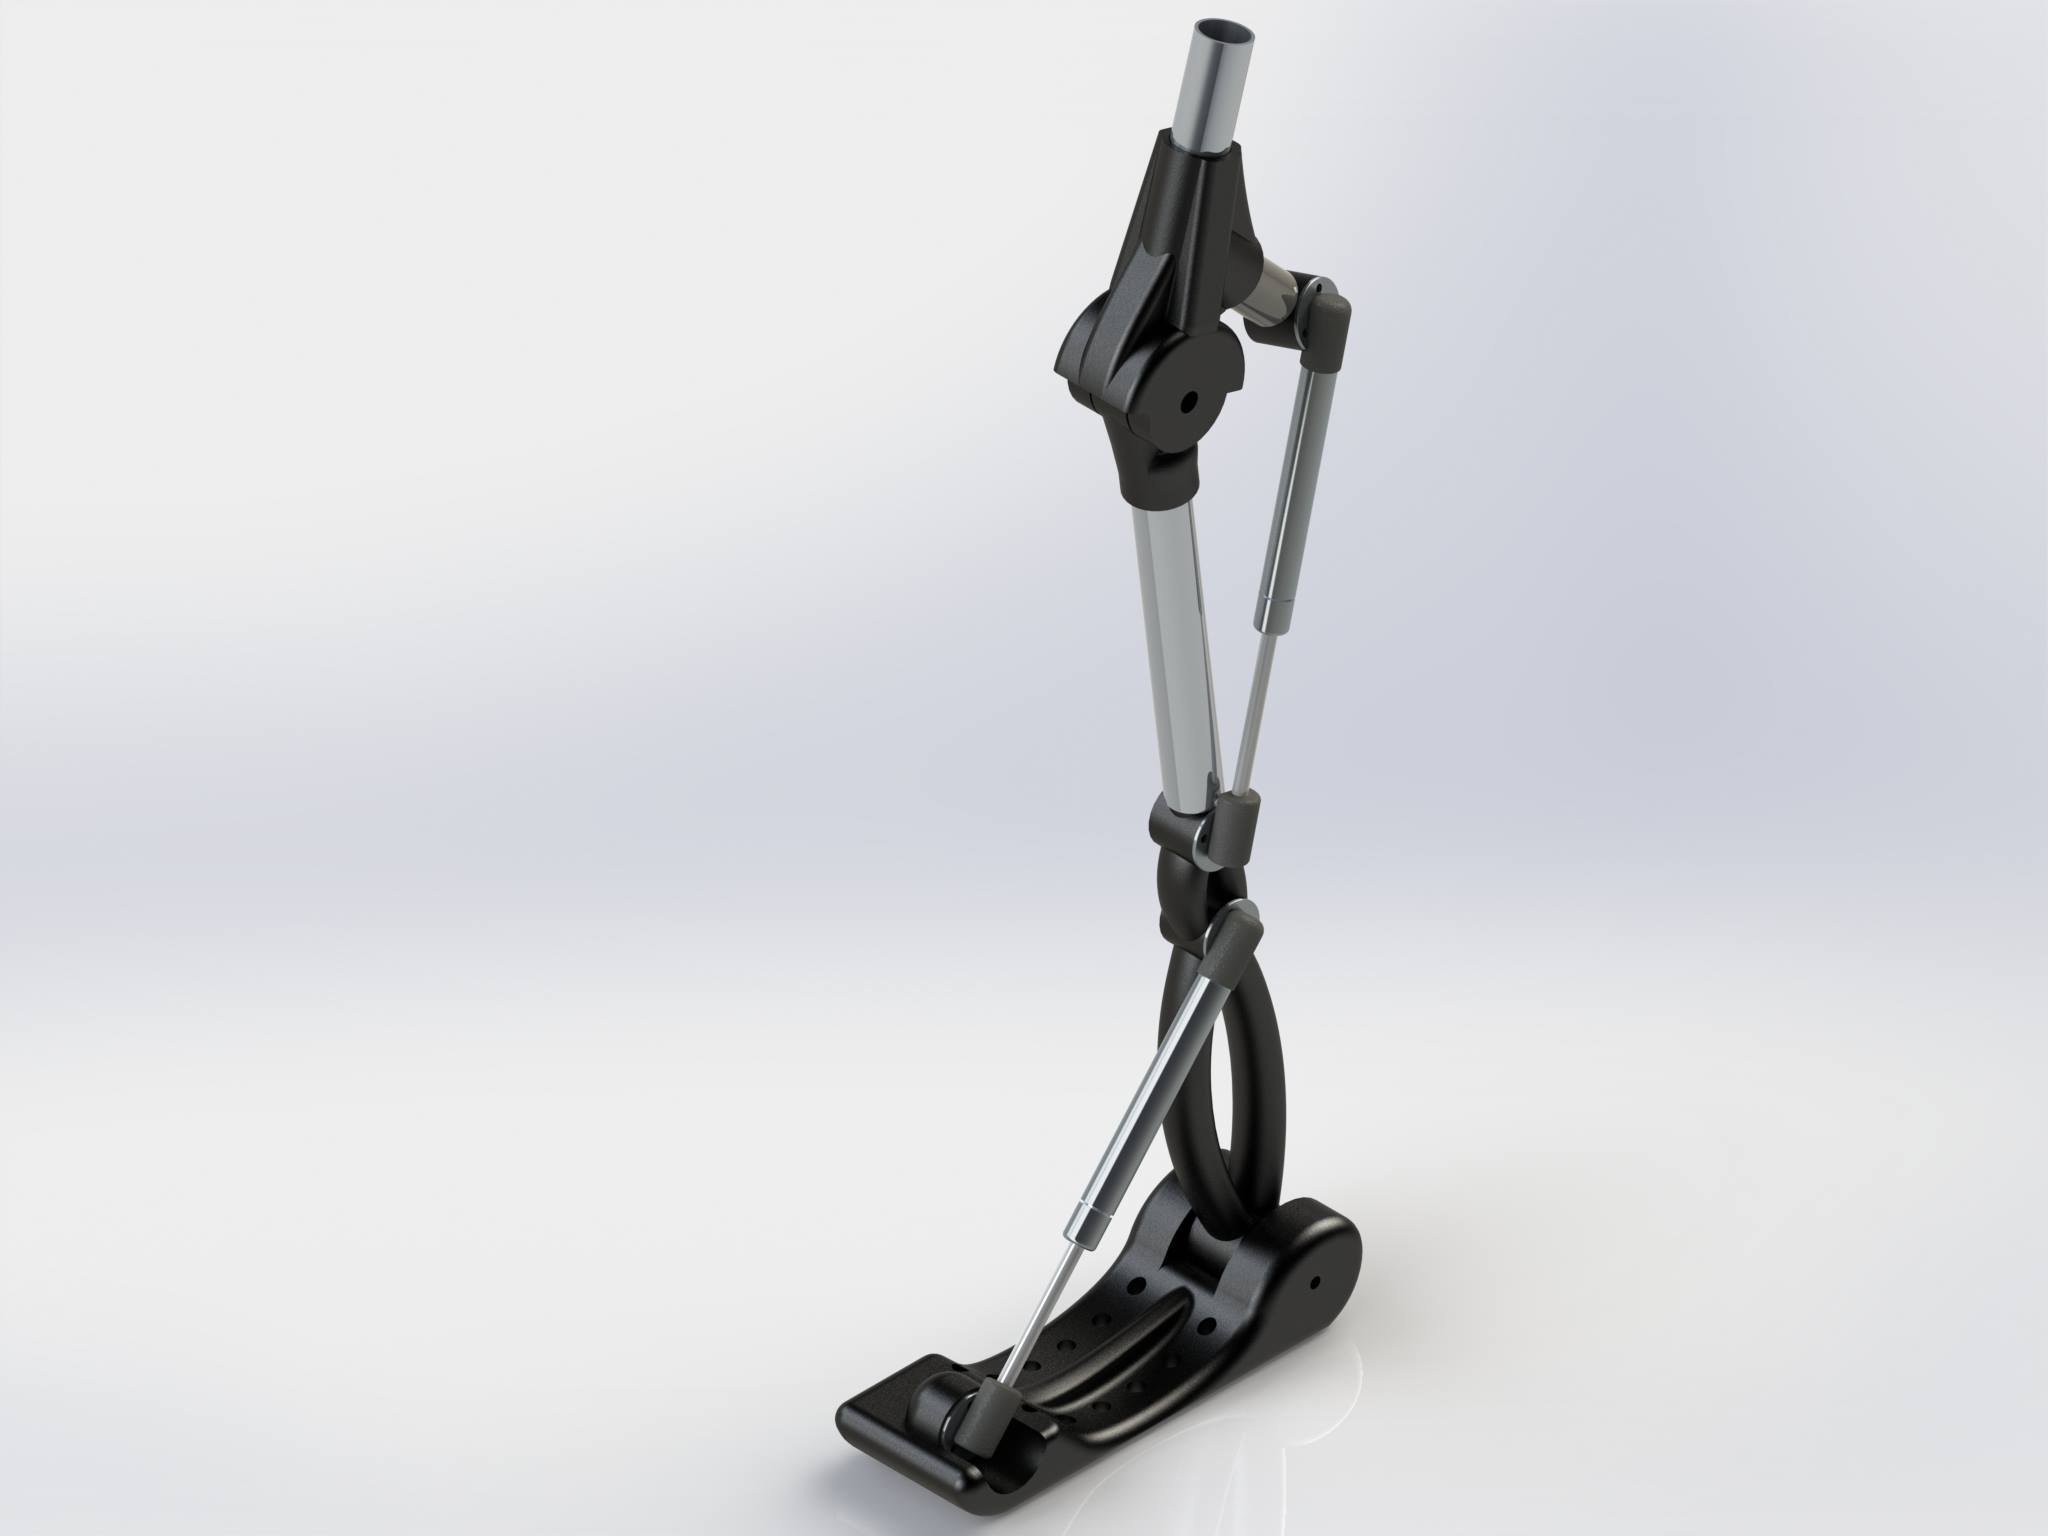 Robohand's latest work-in-progress, the Roboleg, will offer affordable mobility. Courtesy of Robohand.